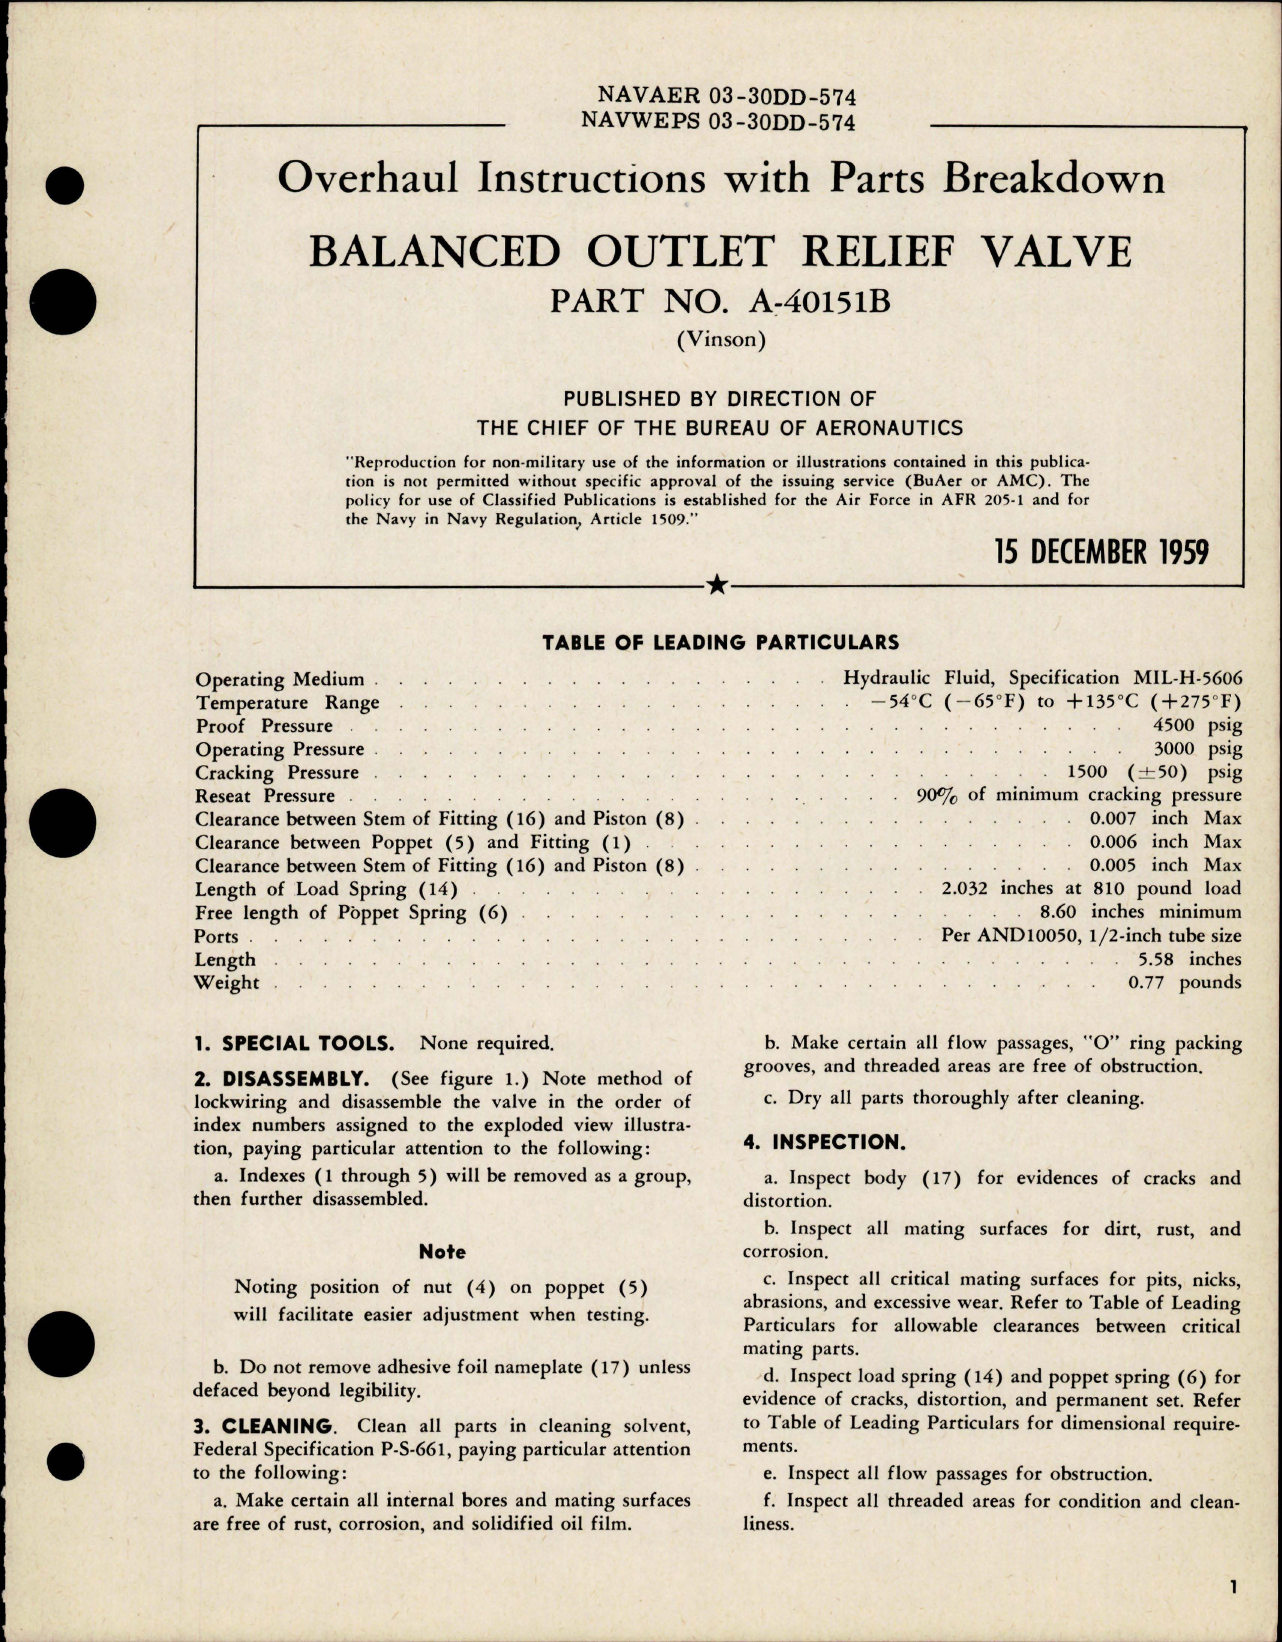 Sample page 1 from AirCorps Library document: Overhaul Instructions with Parts Breakdown for Balanced Outlet Relief Valve - Part A-40151B 